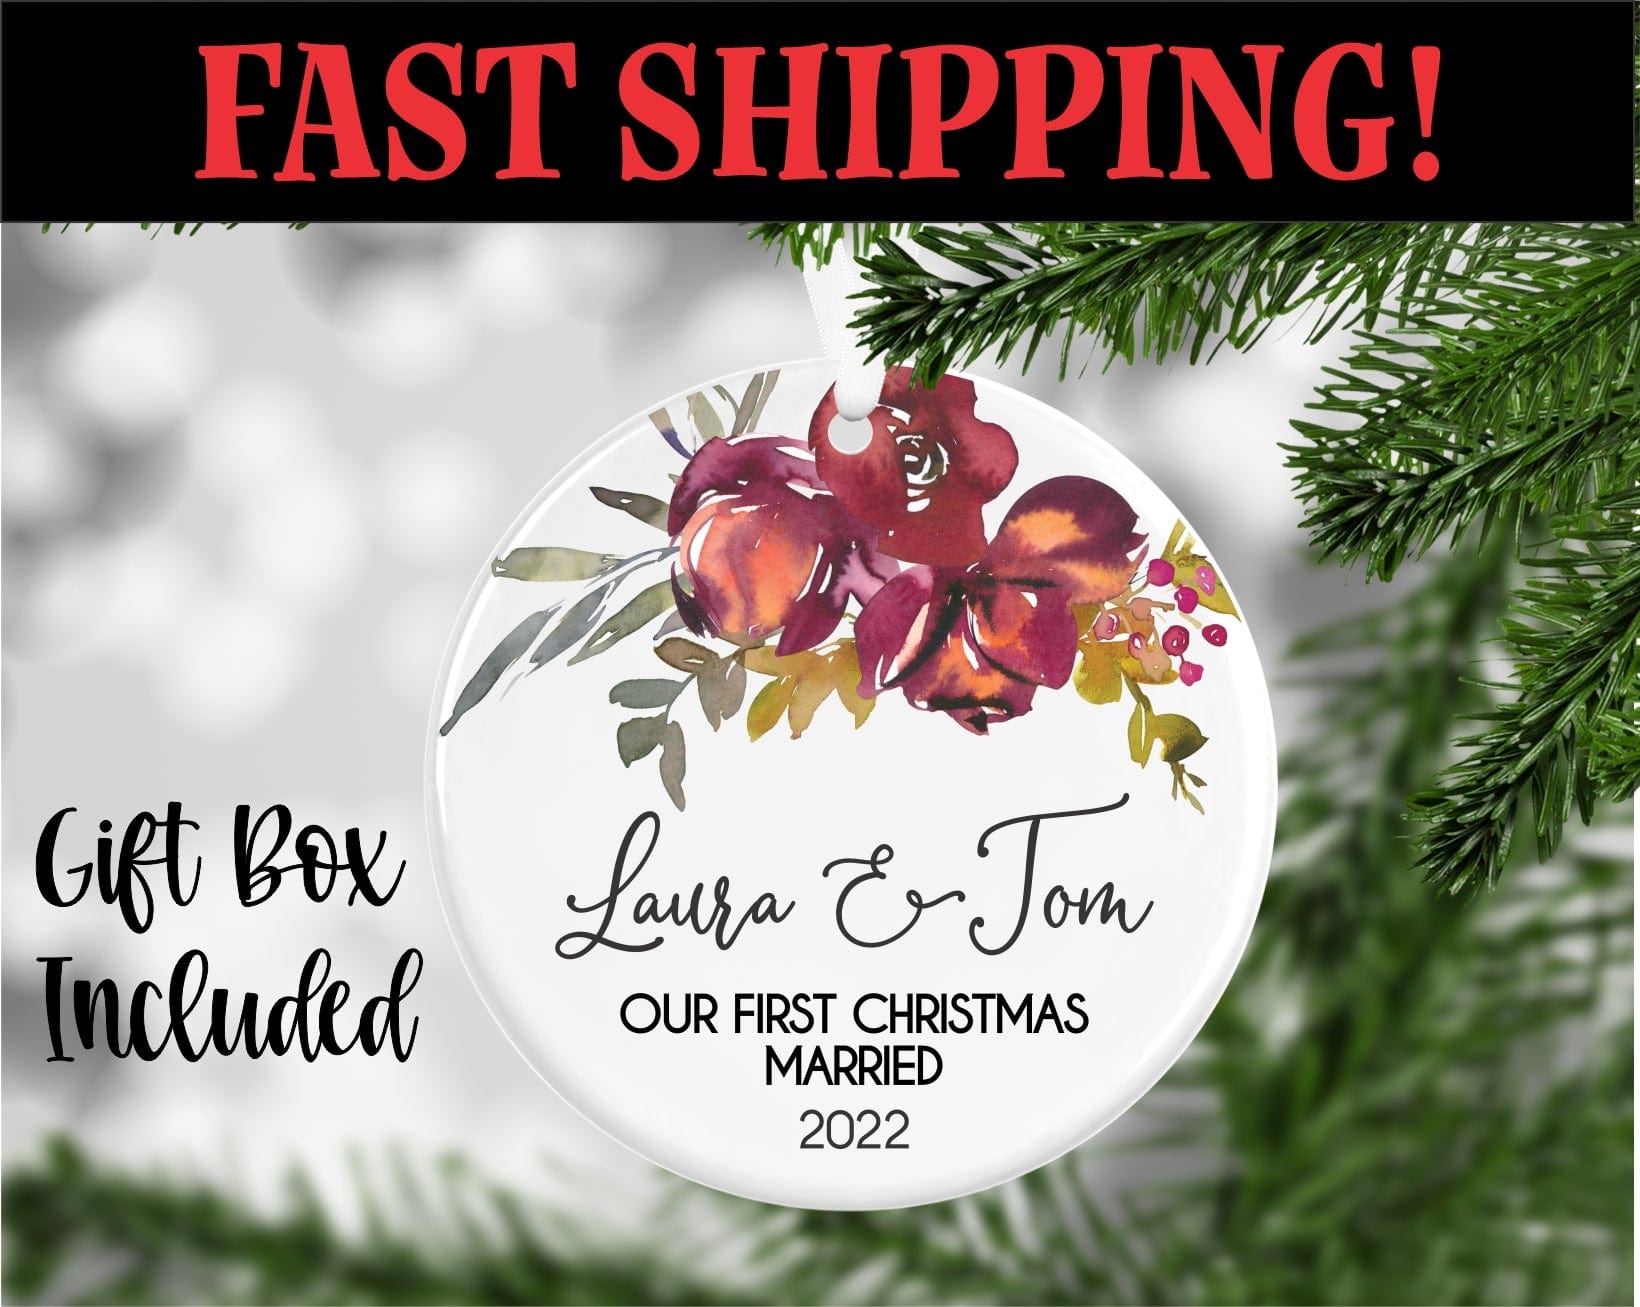 Our first Christmas married Newlywed Ornament Personalized With Names And Year. Has burgundy colored flowers and greenery at top